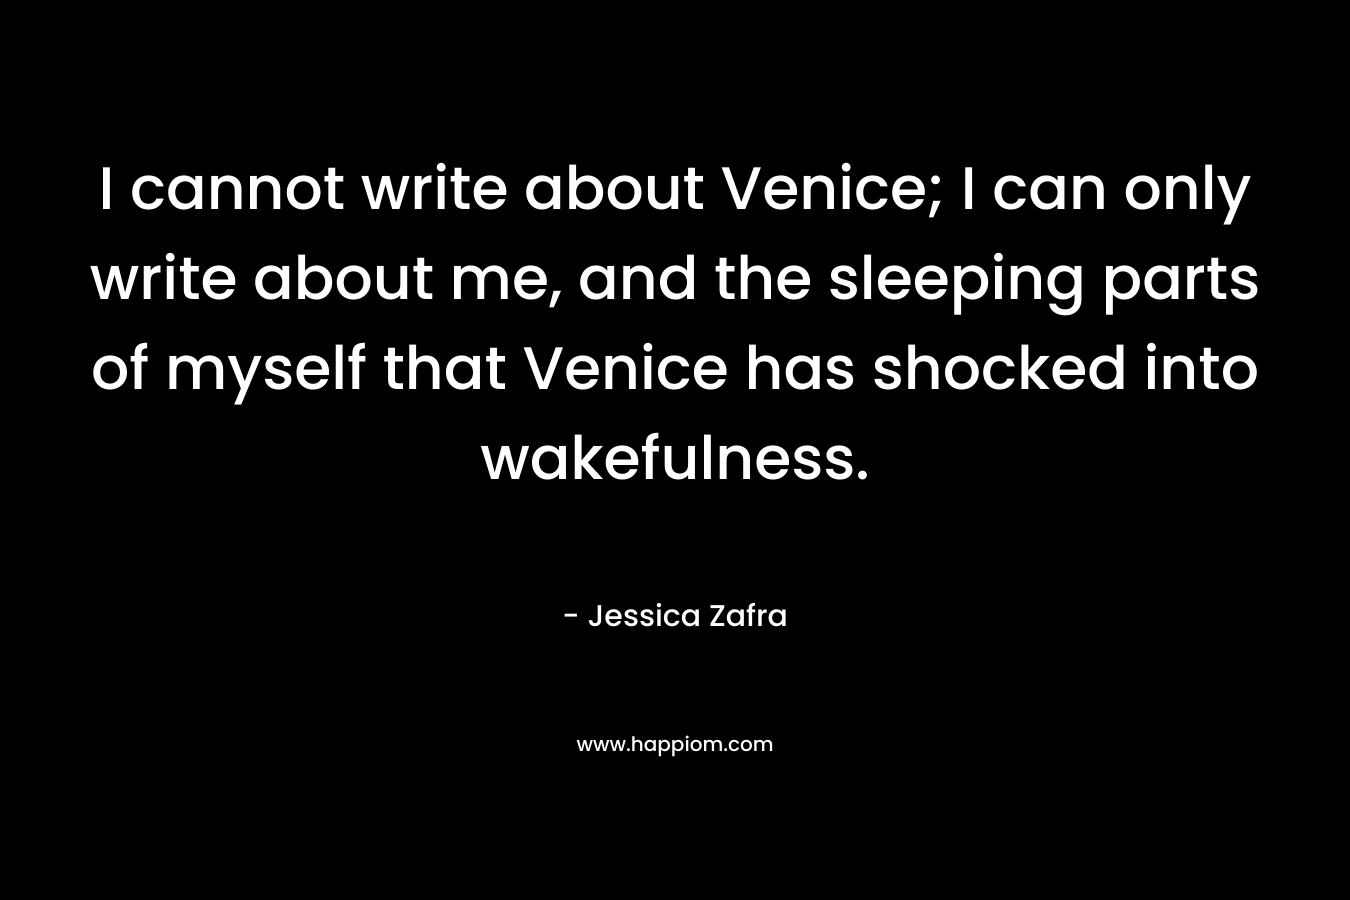 I cannot write about Venice; I can only write about me, and the sleeping parts of myself that Venice has shocked into wakefulness.